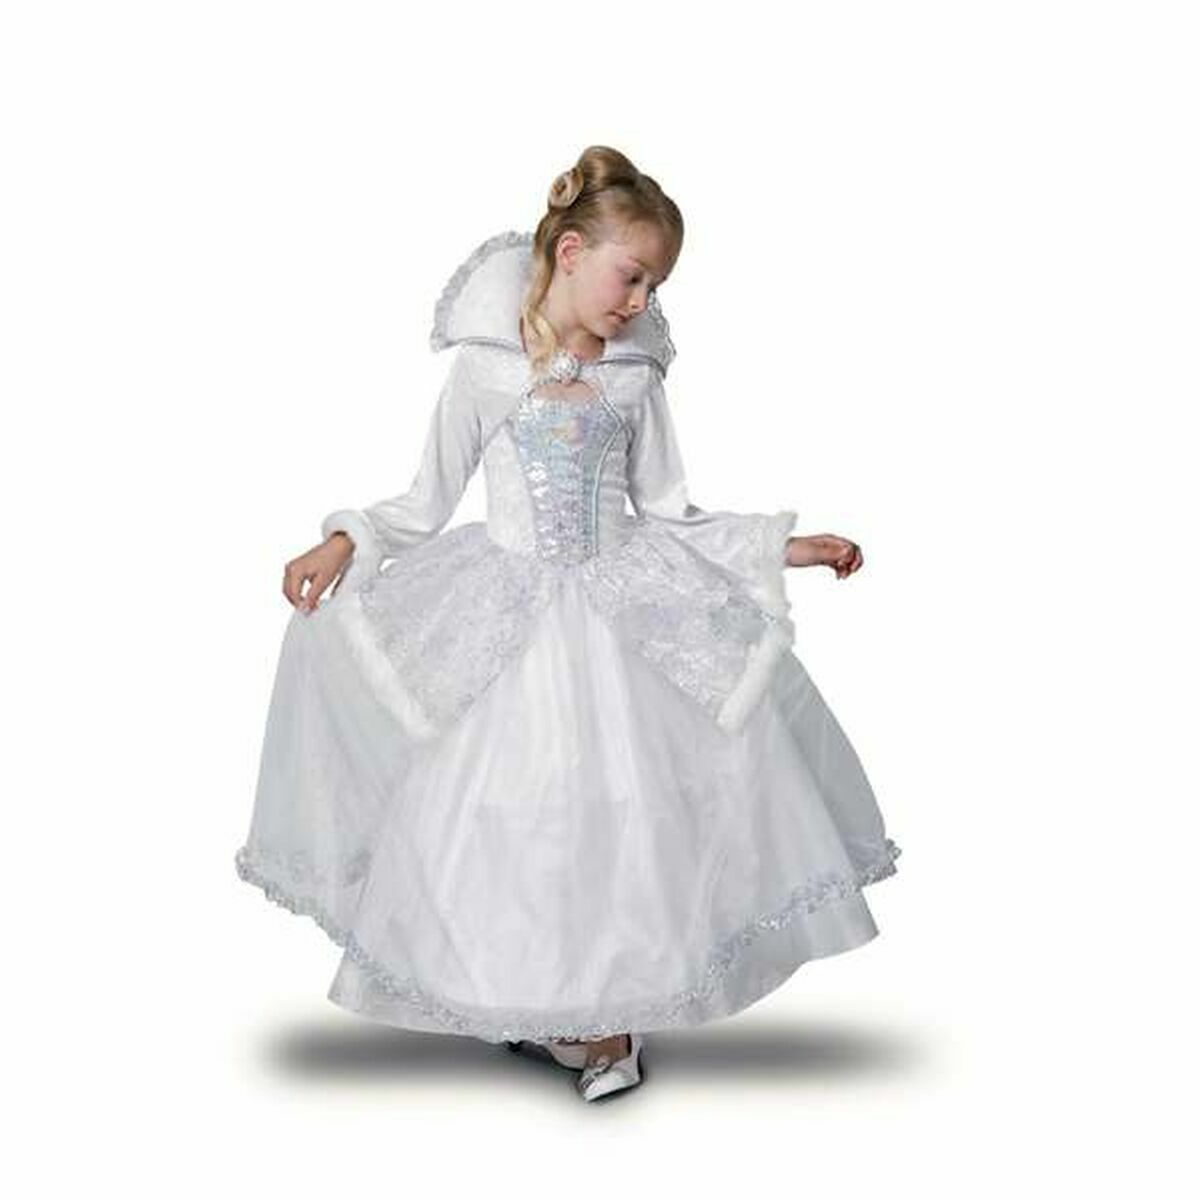 Costume for Children My Other Me Snow Princess Queen White